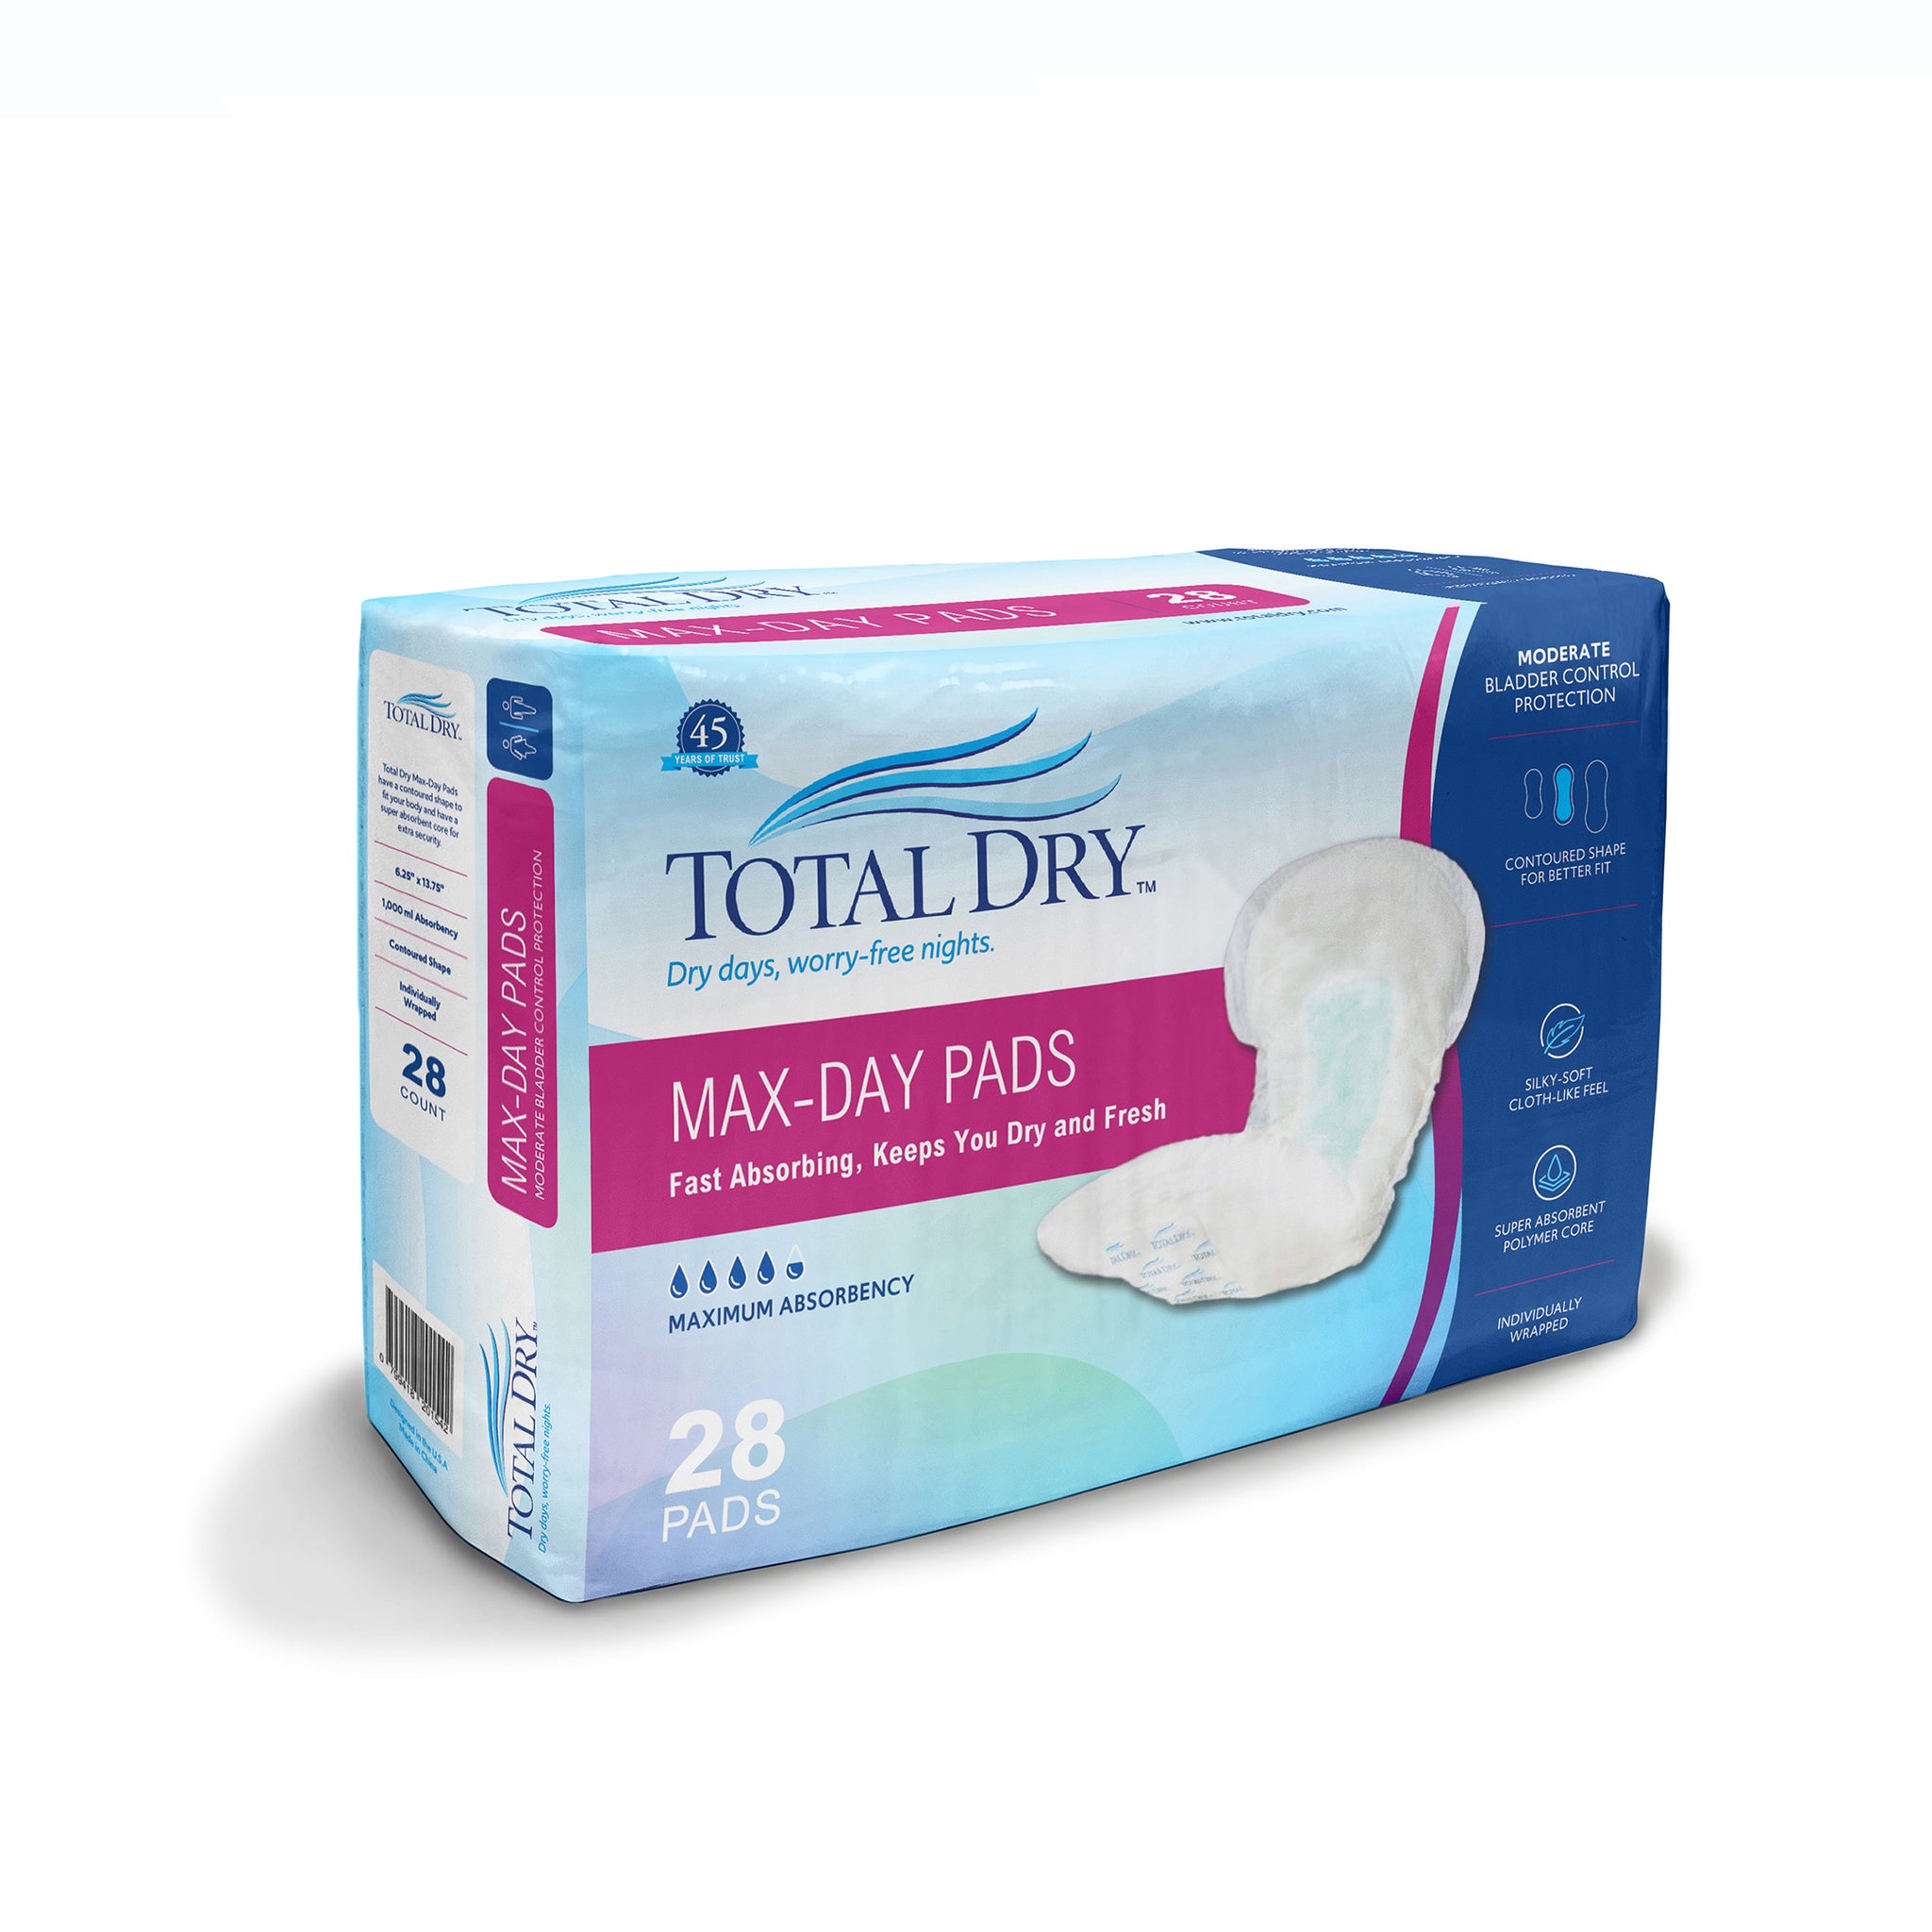 TotalDry Max-Day Pads